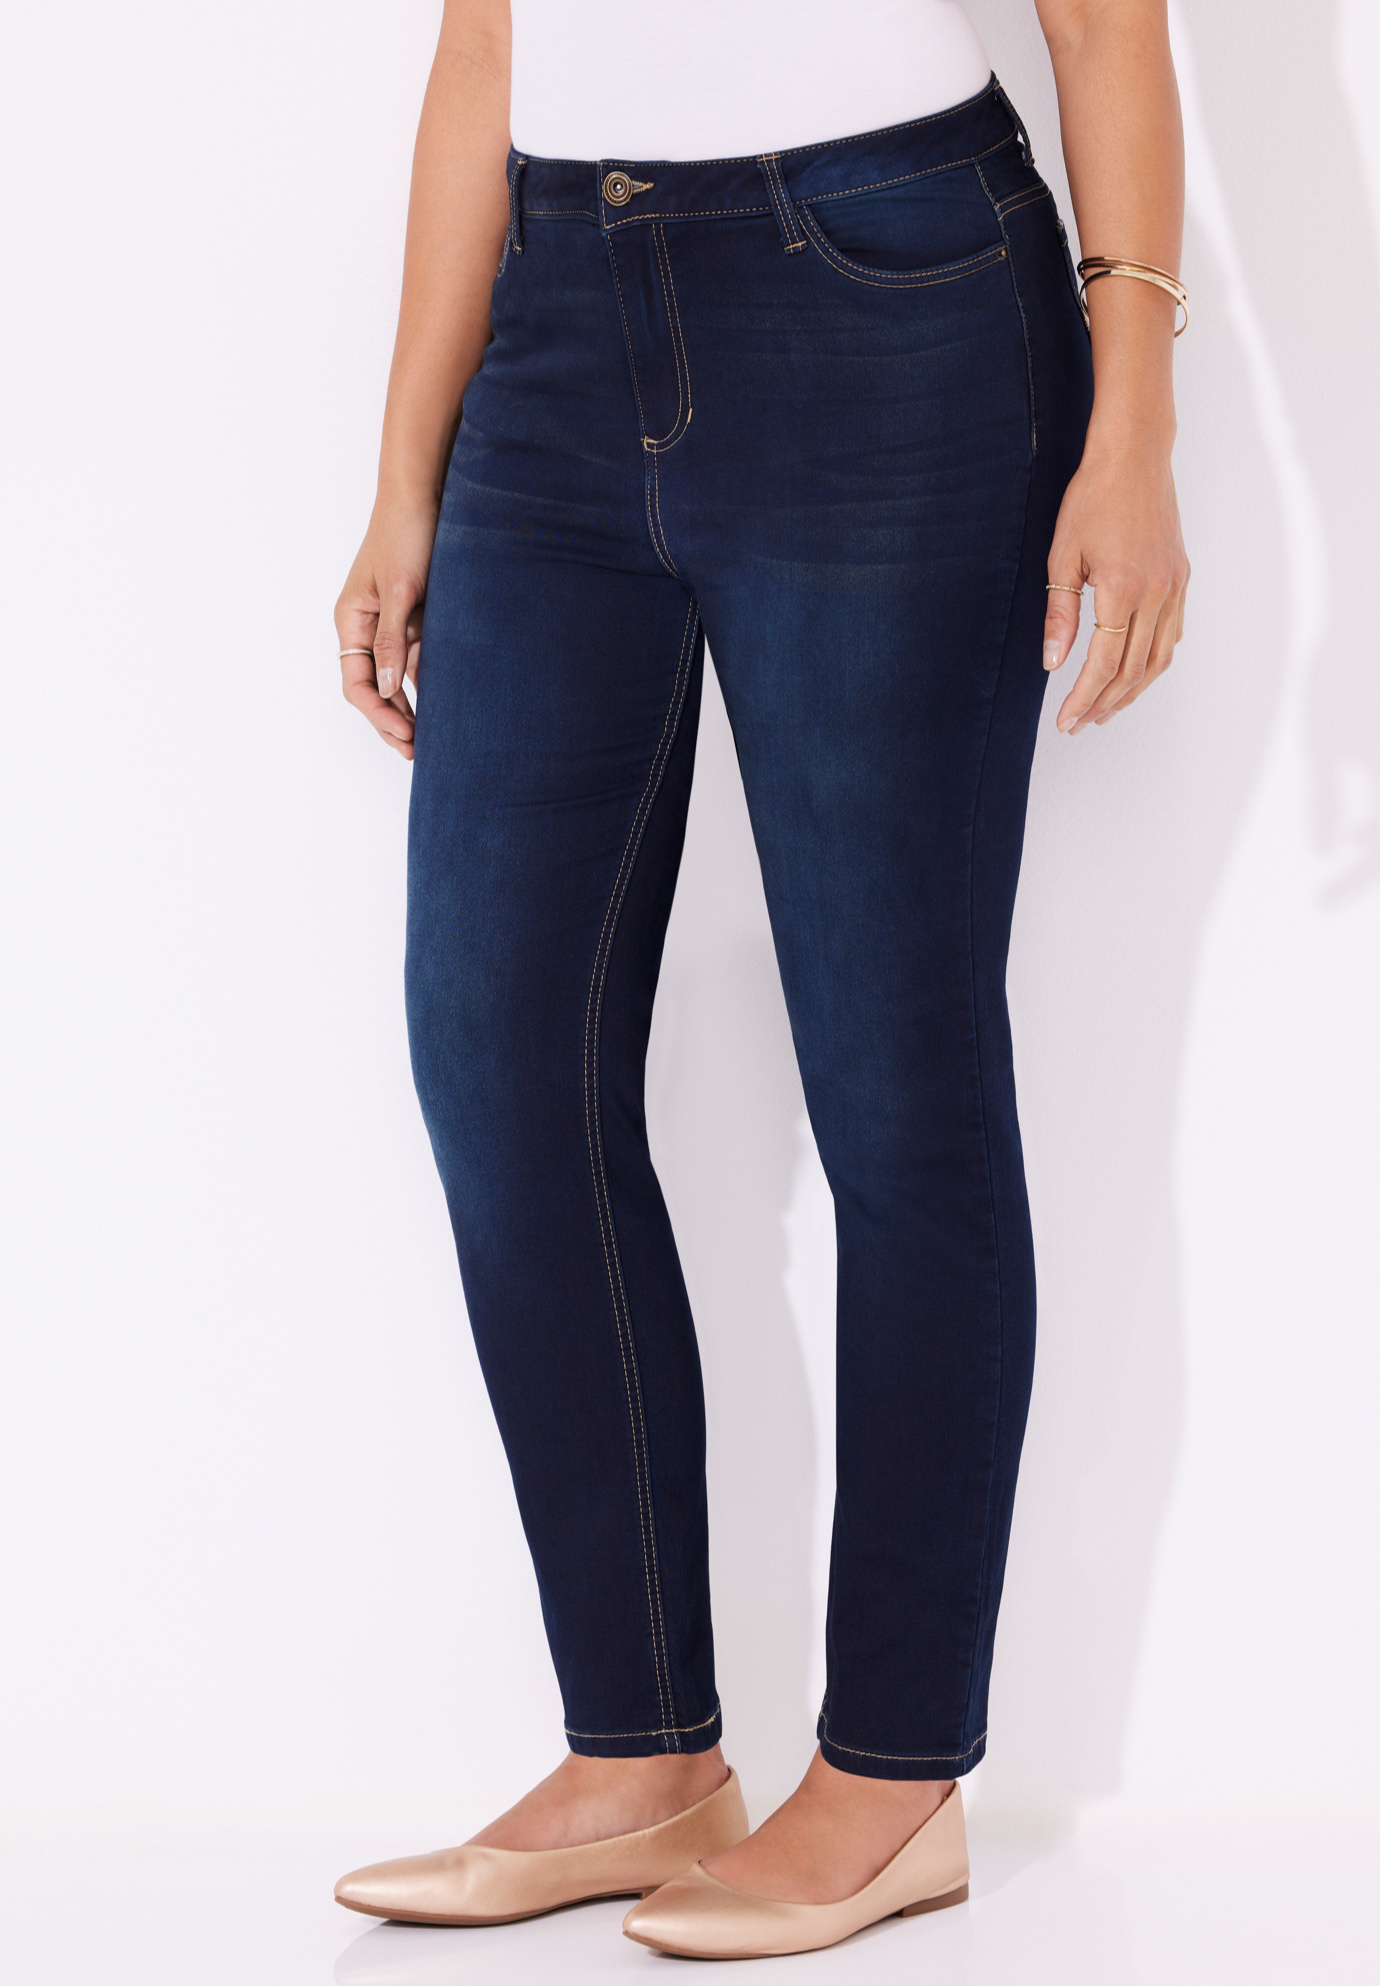 black relaxed skinny jeans